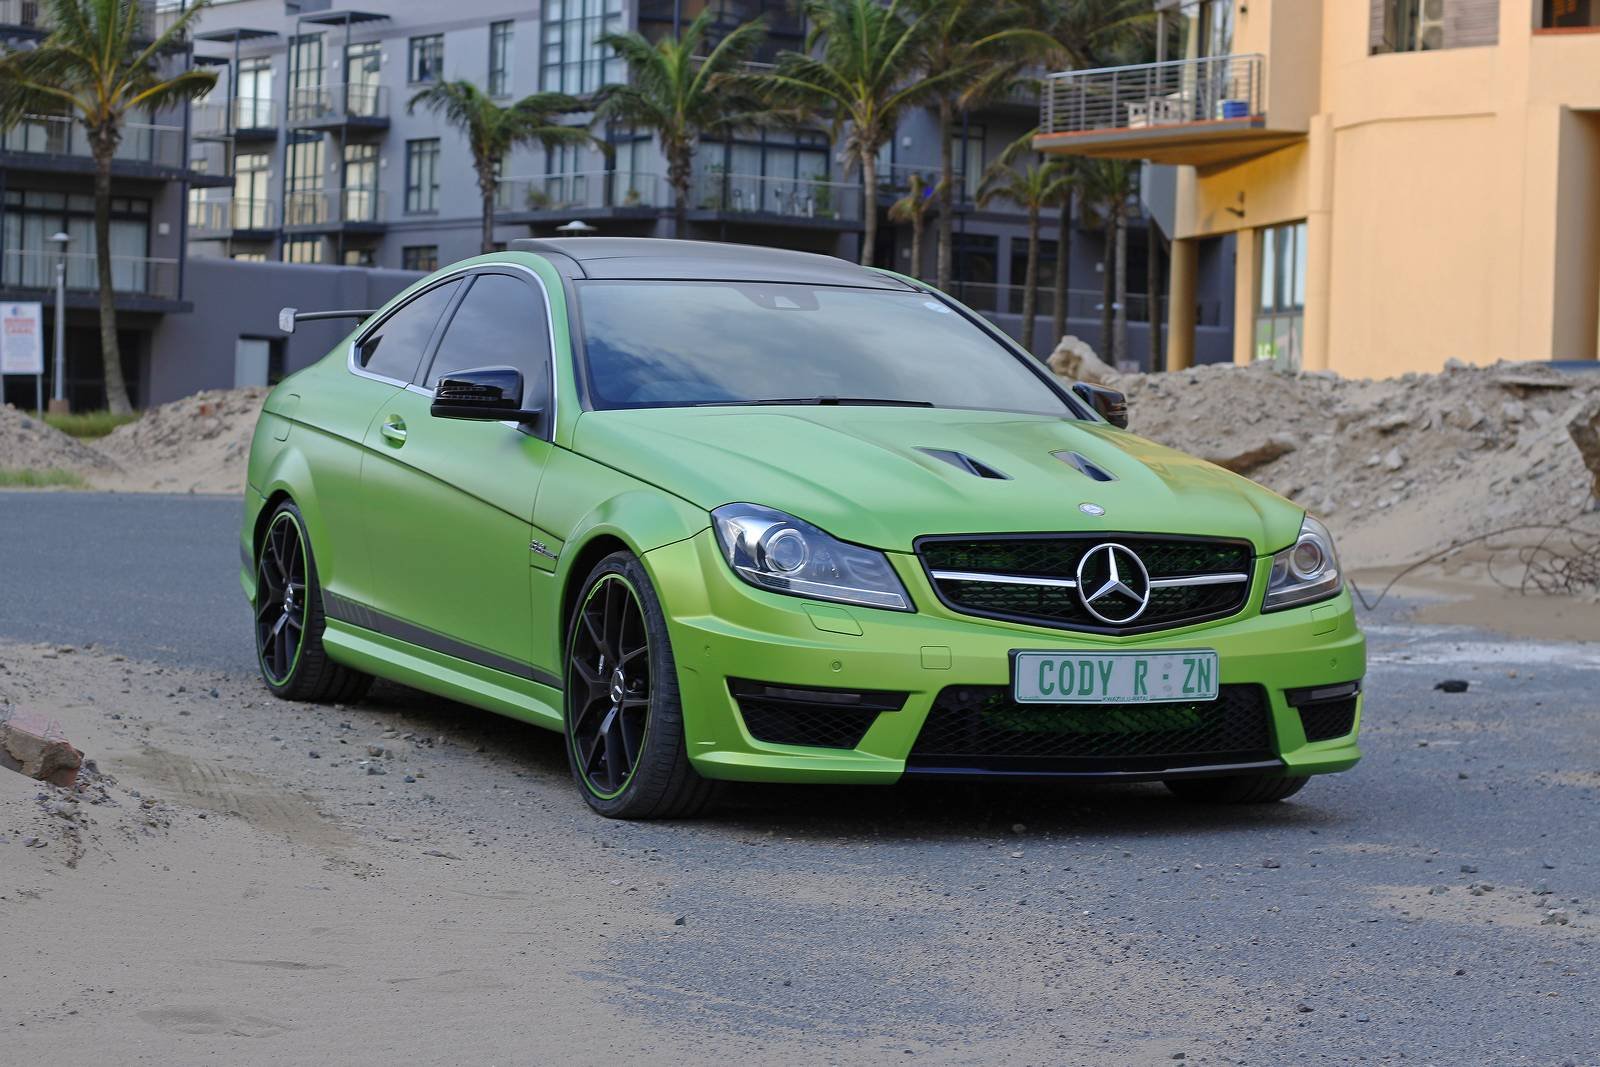 mercedes, Benz, C63, Green, Amg, Coupe, Legacy, Edition, Cars, 2016 Wallpaper